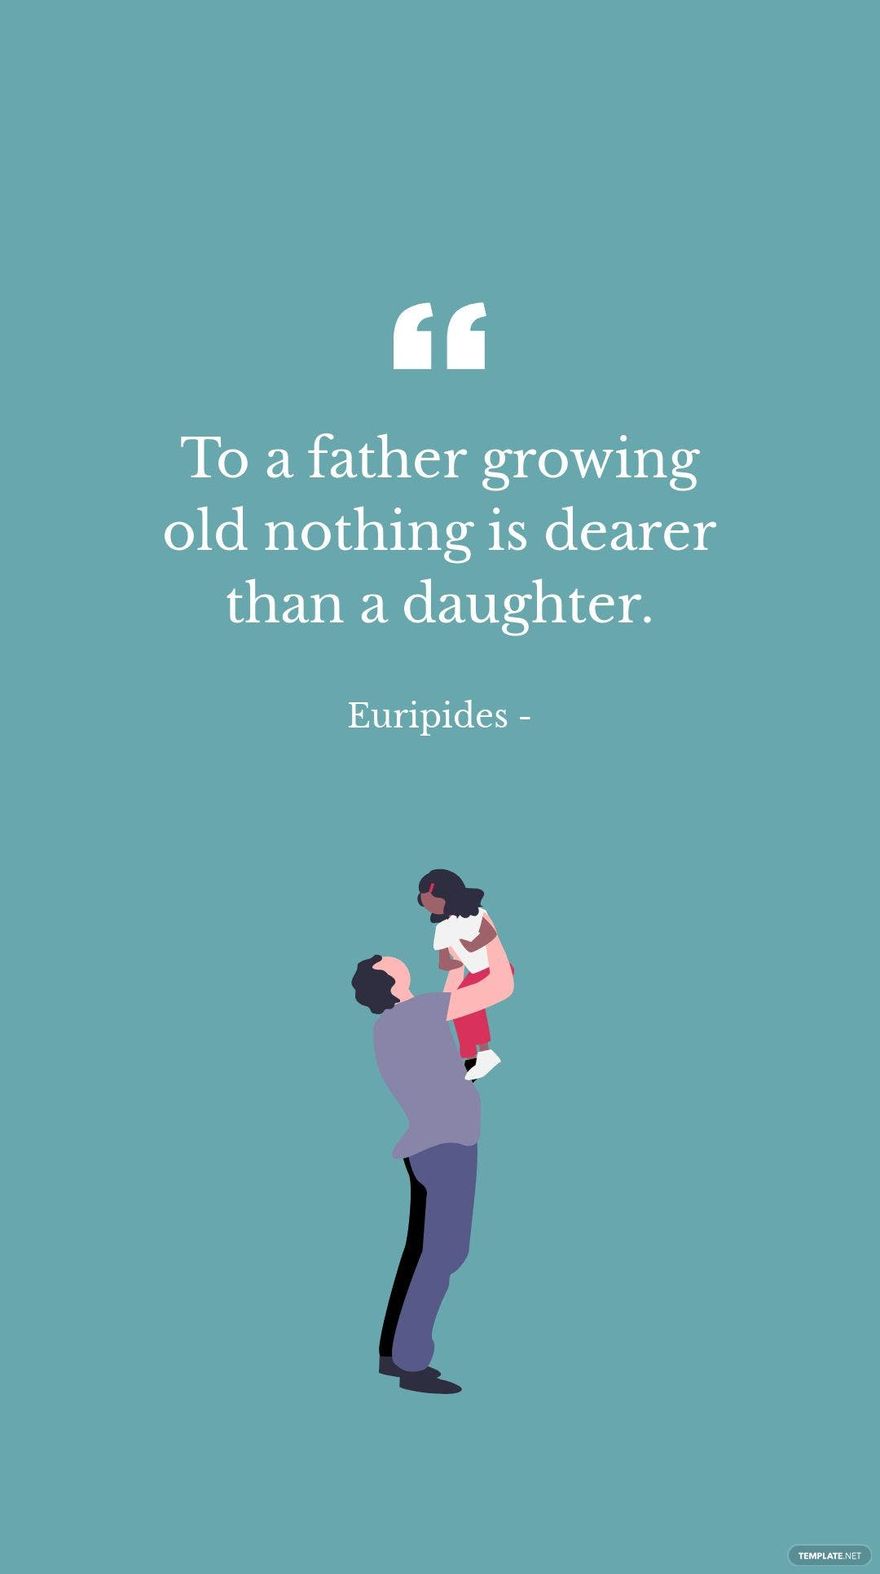 Free EURIPIDES - To a father growing old nothing is dearer than a daughter. in JPG